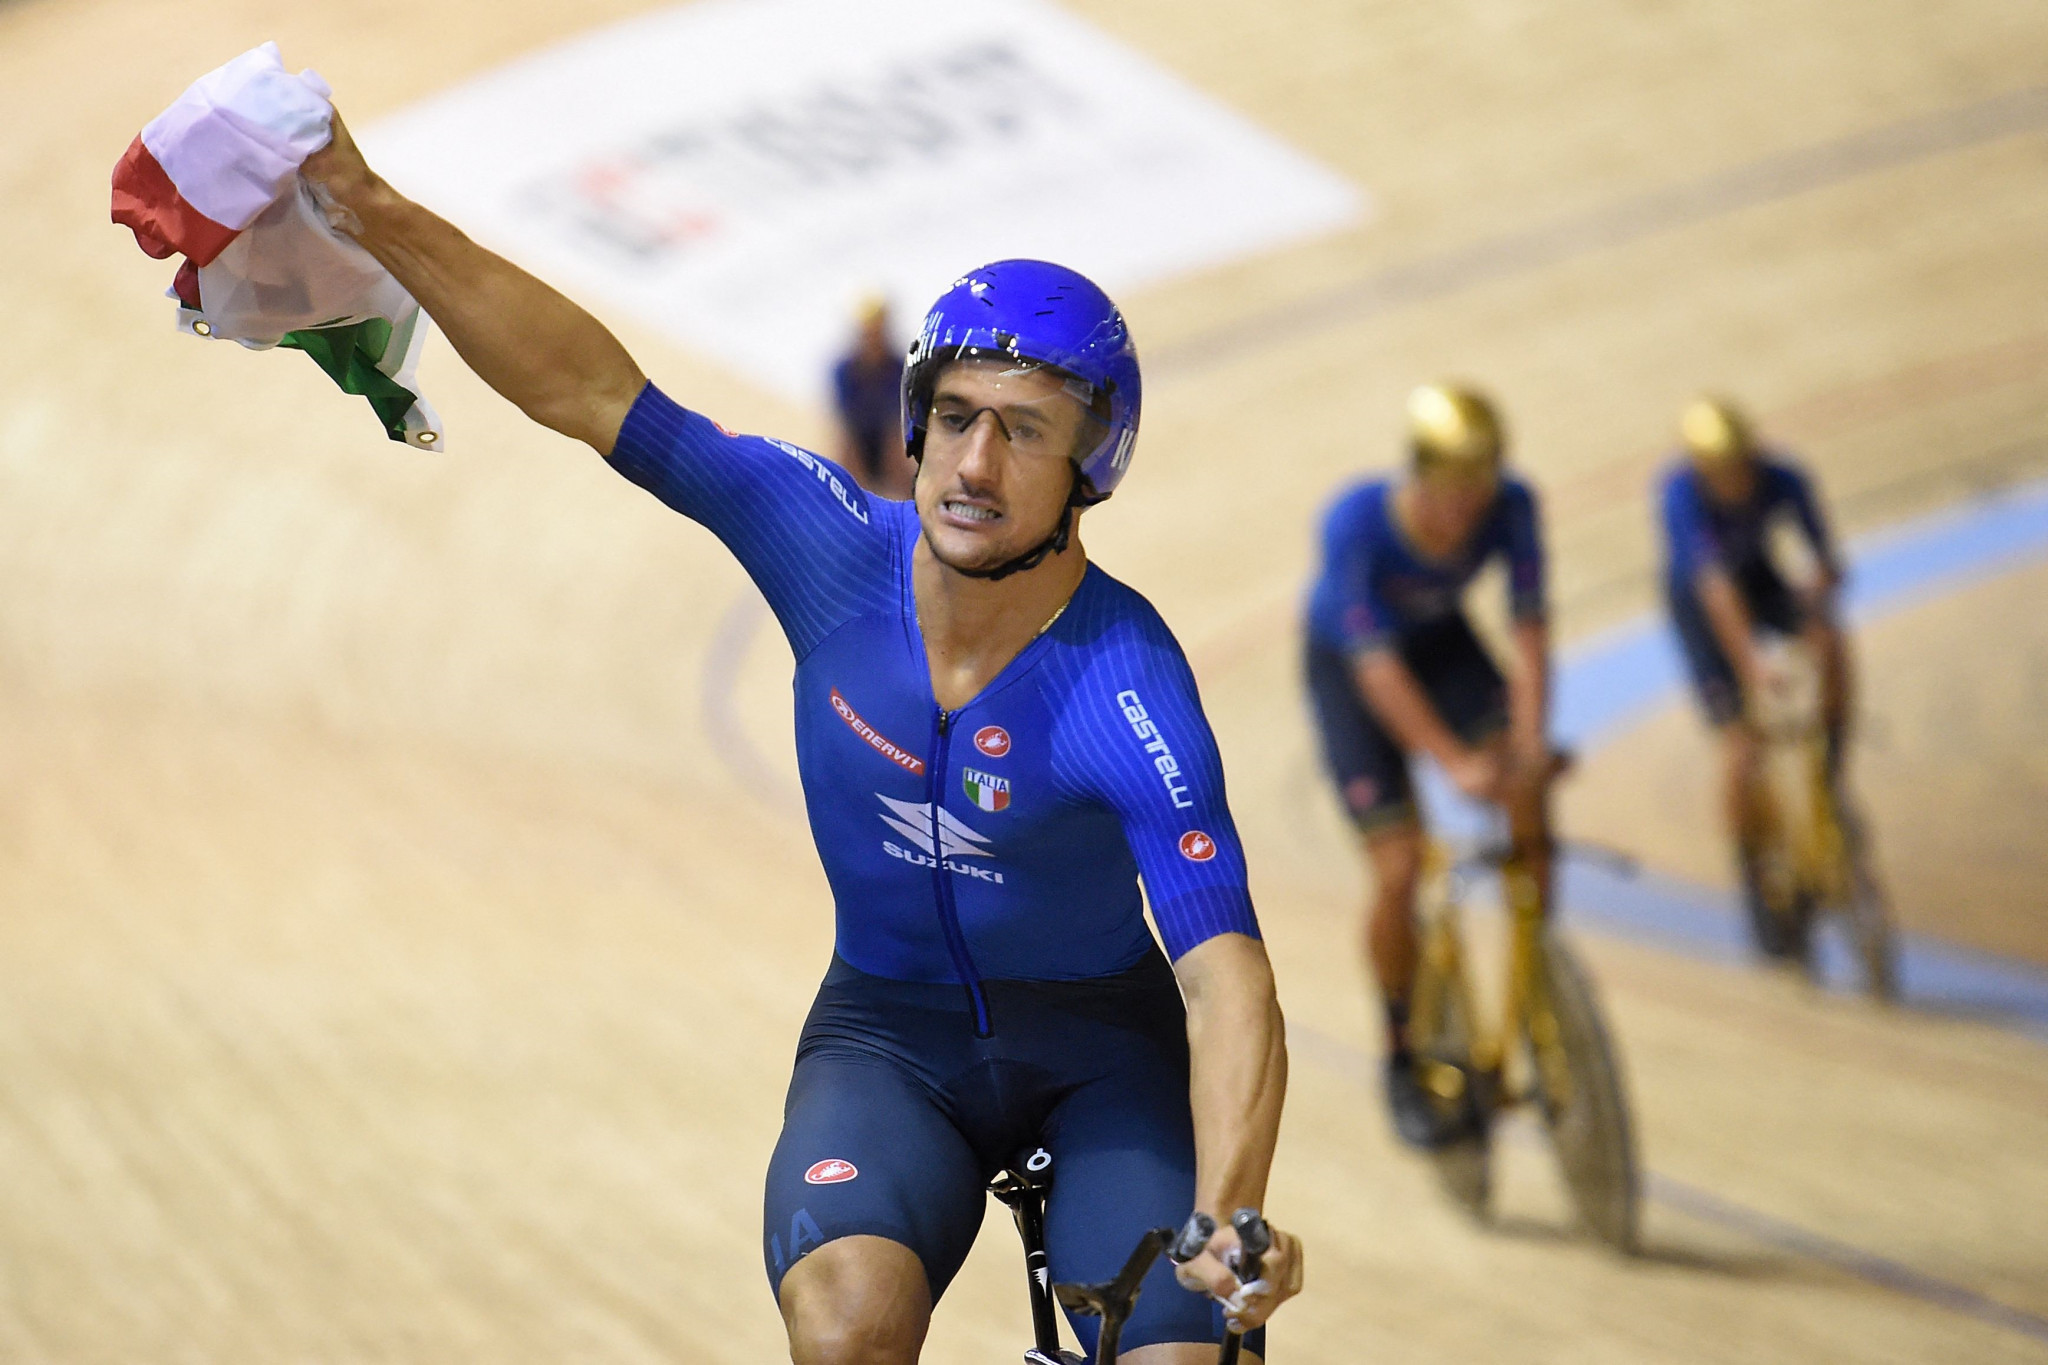 Italy have bikes stolen at UCI Track Cycling World Championships